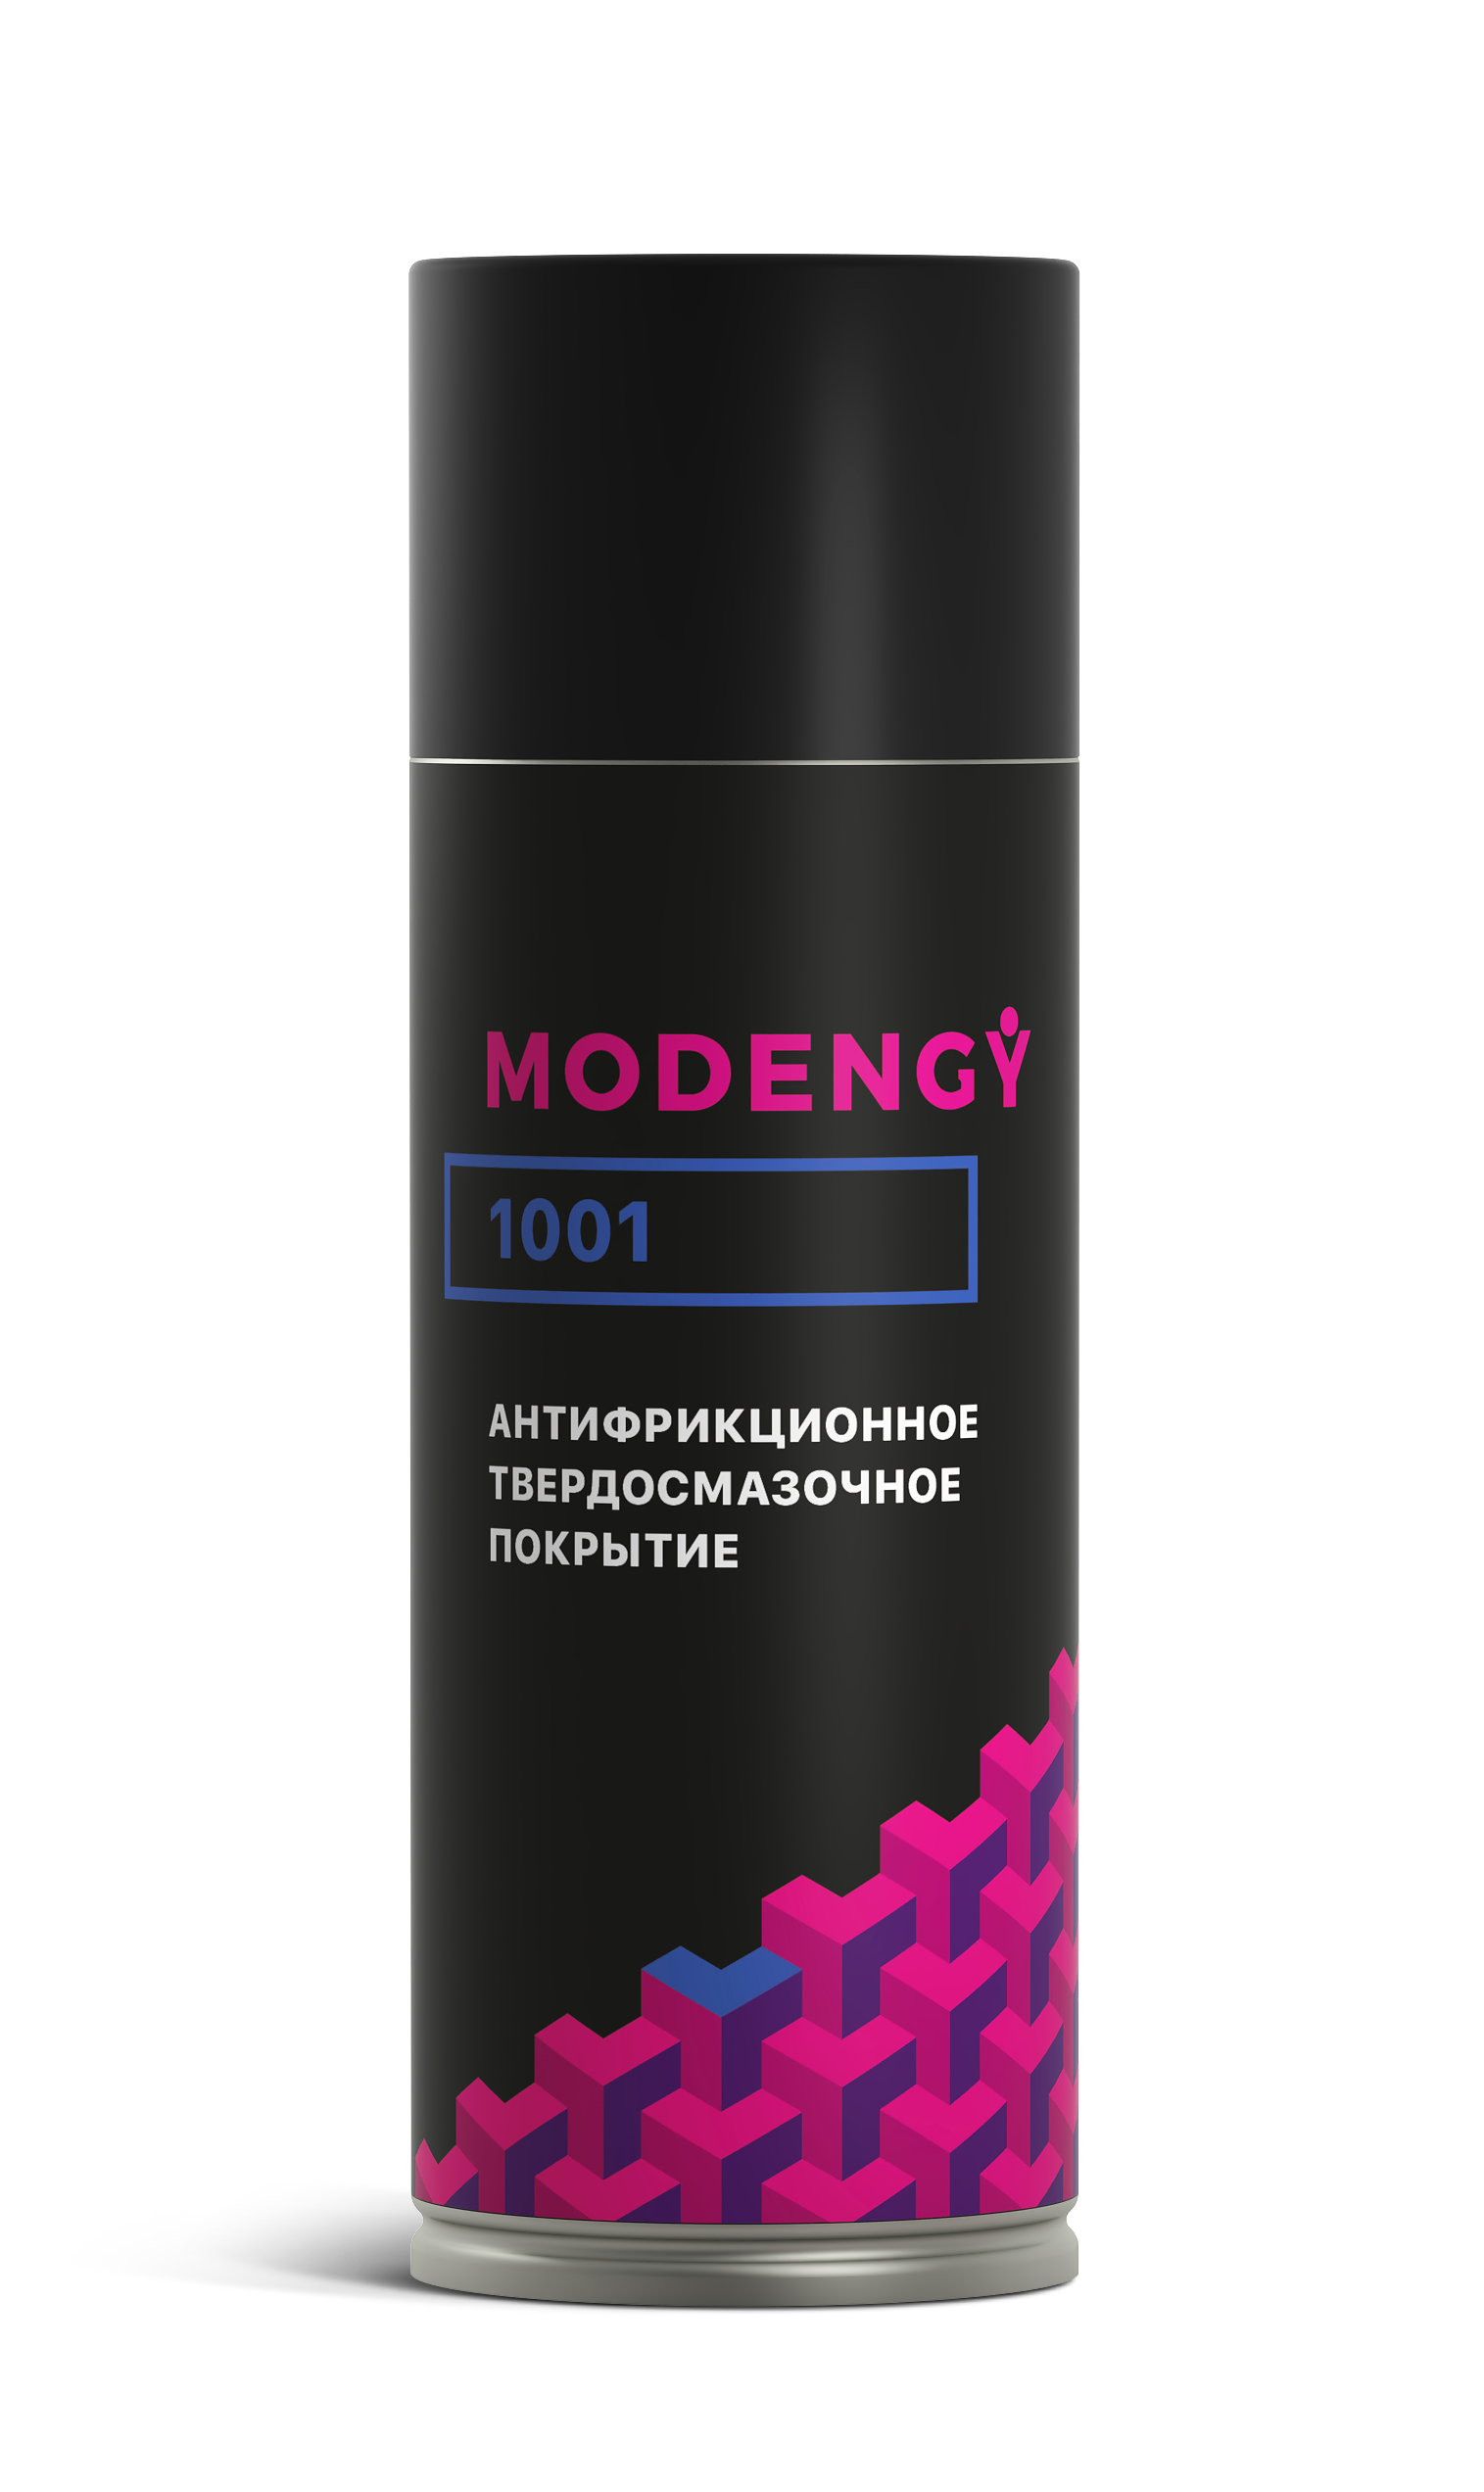   MODENGY 1001